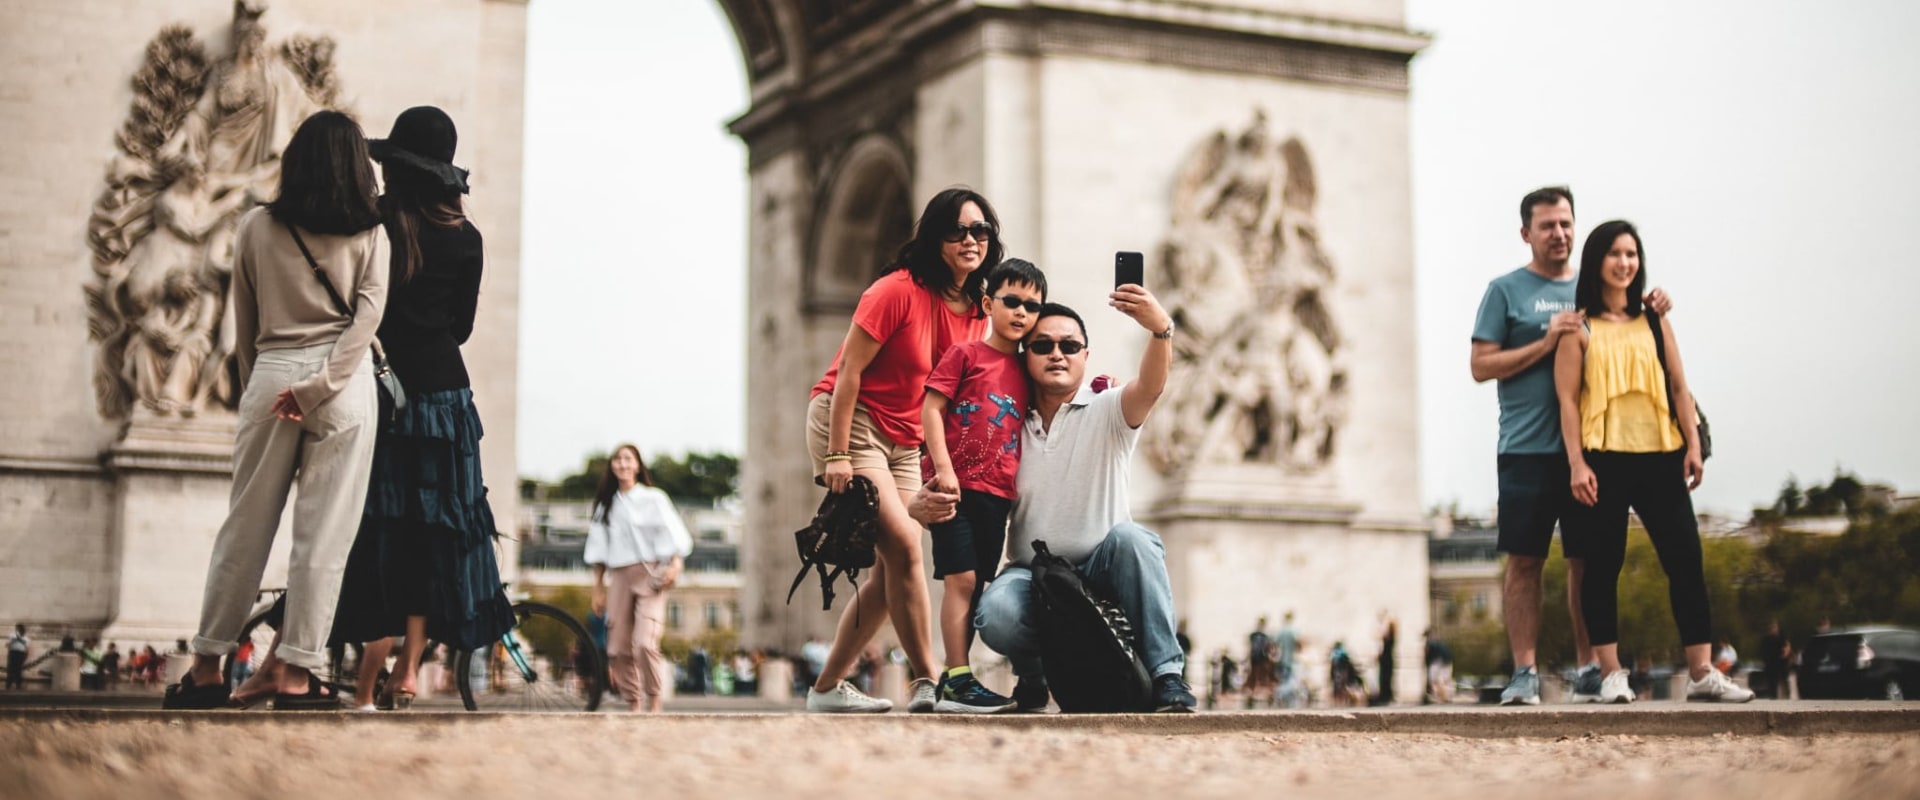 7 Types of Tourists: Exploring Different Types of Travelers